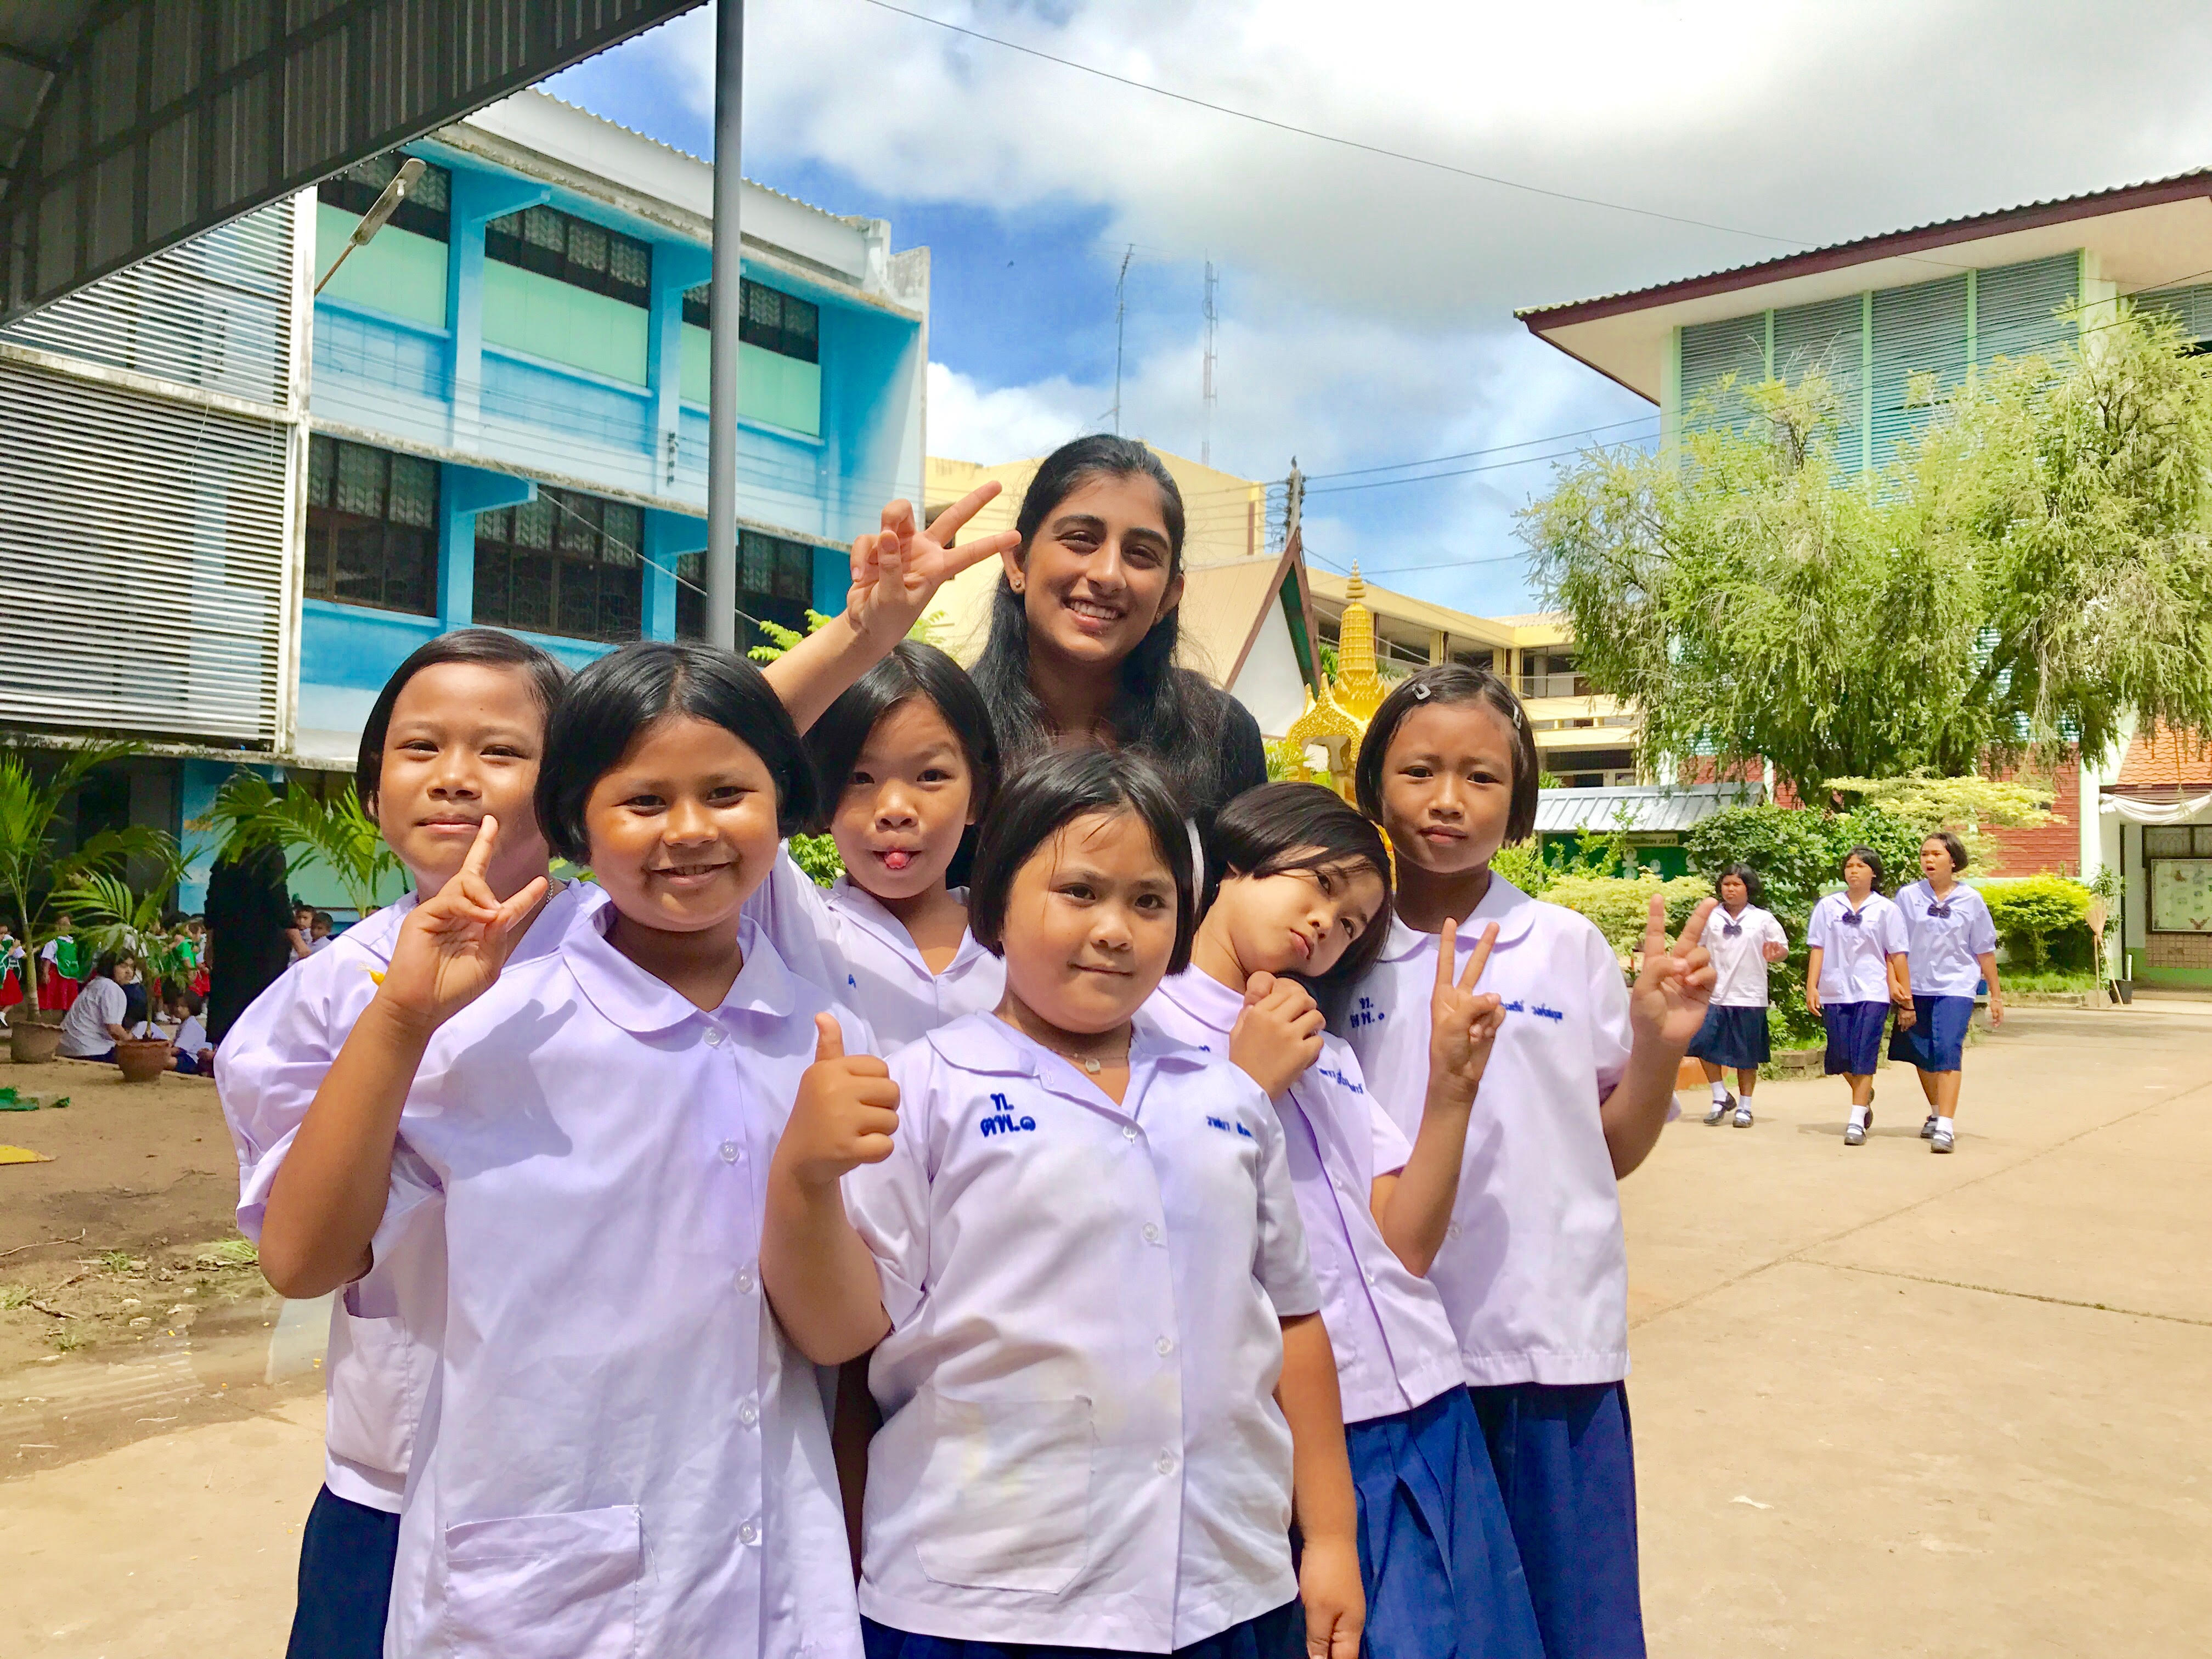 Rhea Singh spent a summer in the villages of central Thailand teaching English to young students.